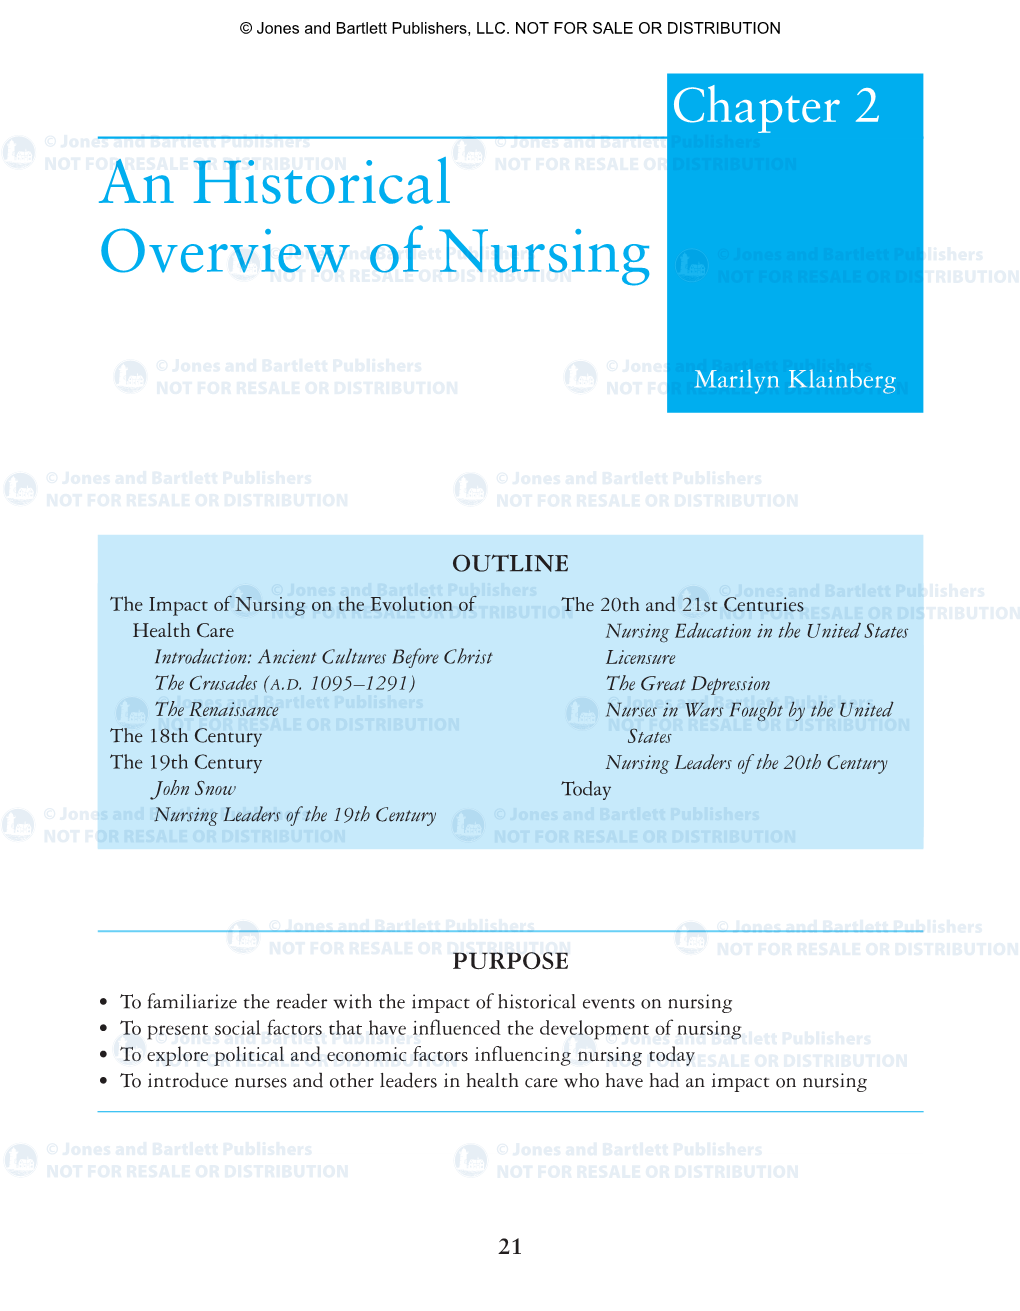 An Historical Overview of Nursing